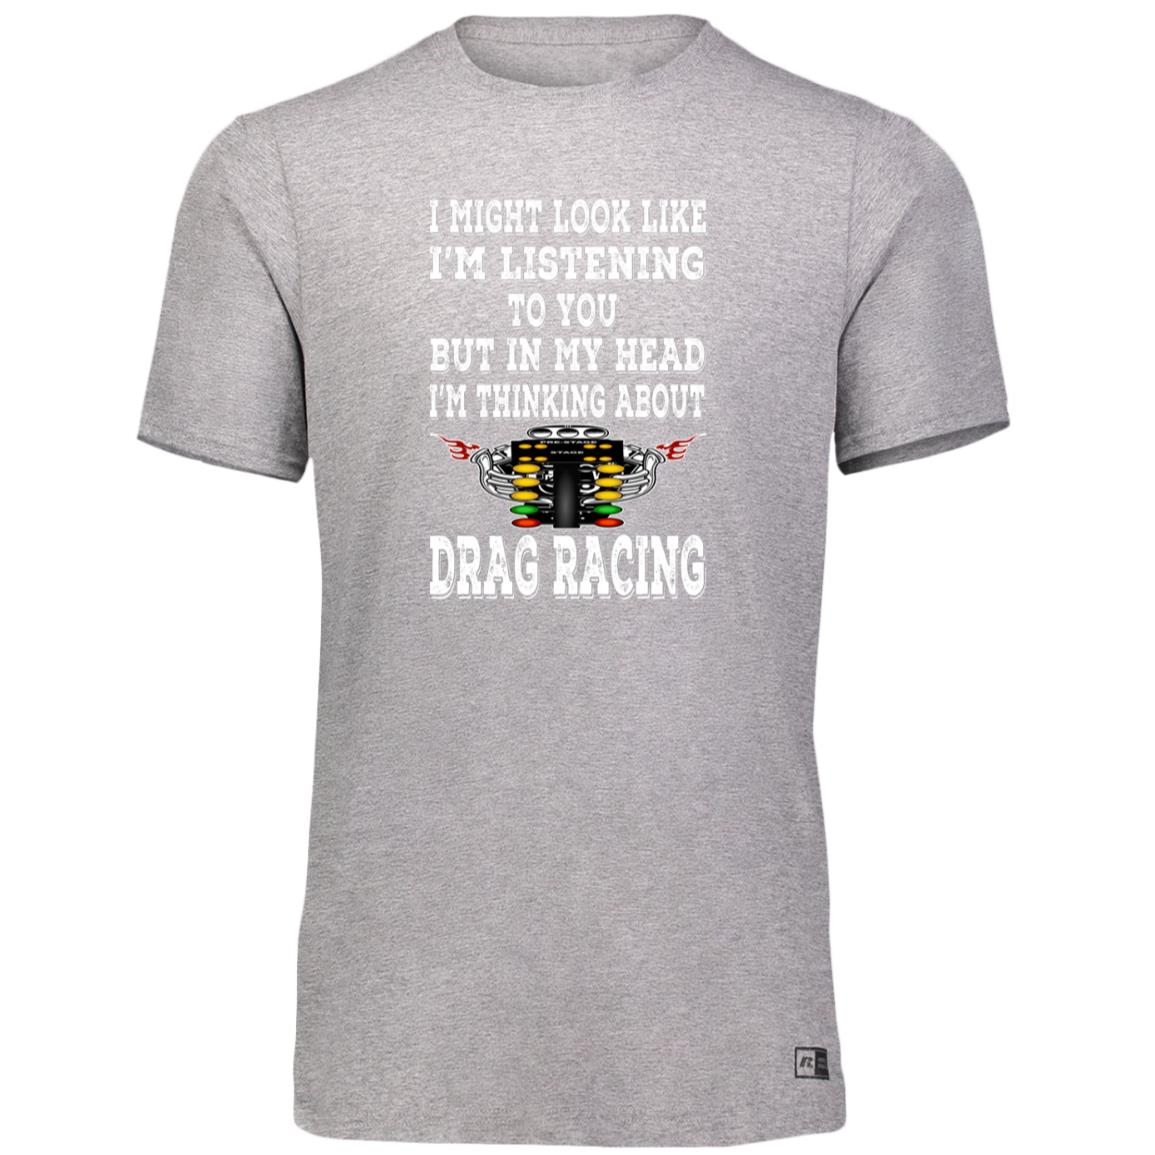 I Might look Like I'm Listening To You Drag Racing Essential Dri-Power Tee